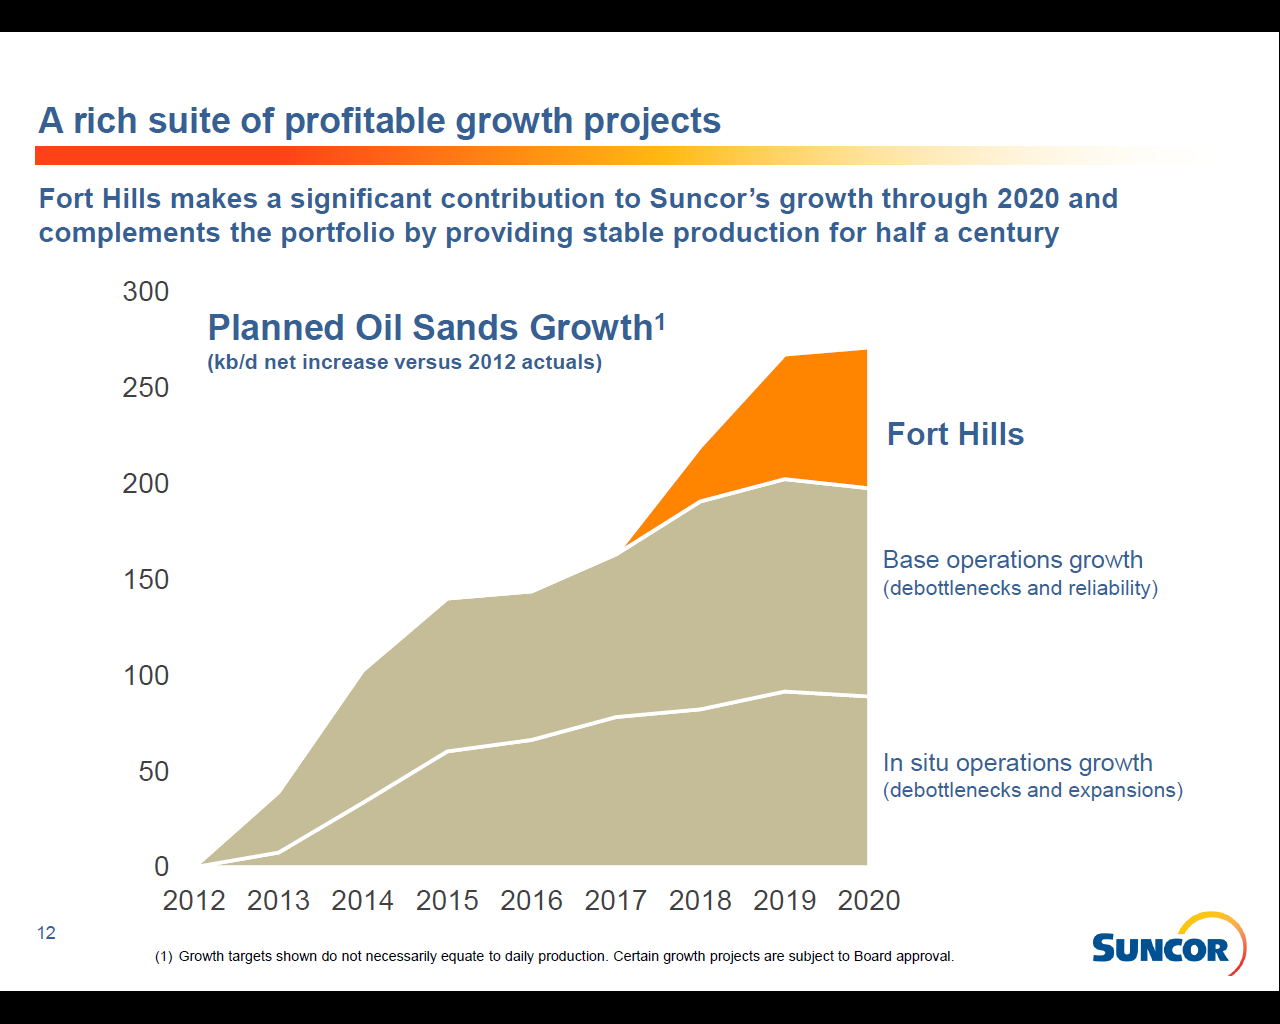 Suncor's New Fort Hills Project 50 Years Of Stable Cash Flow And